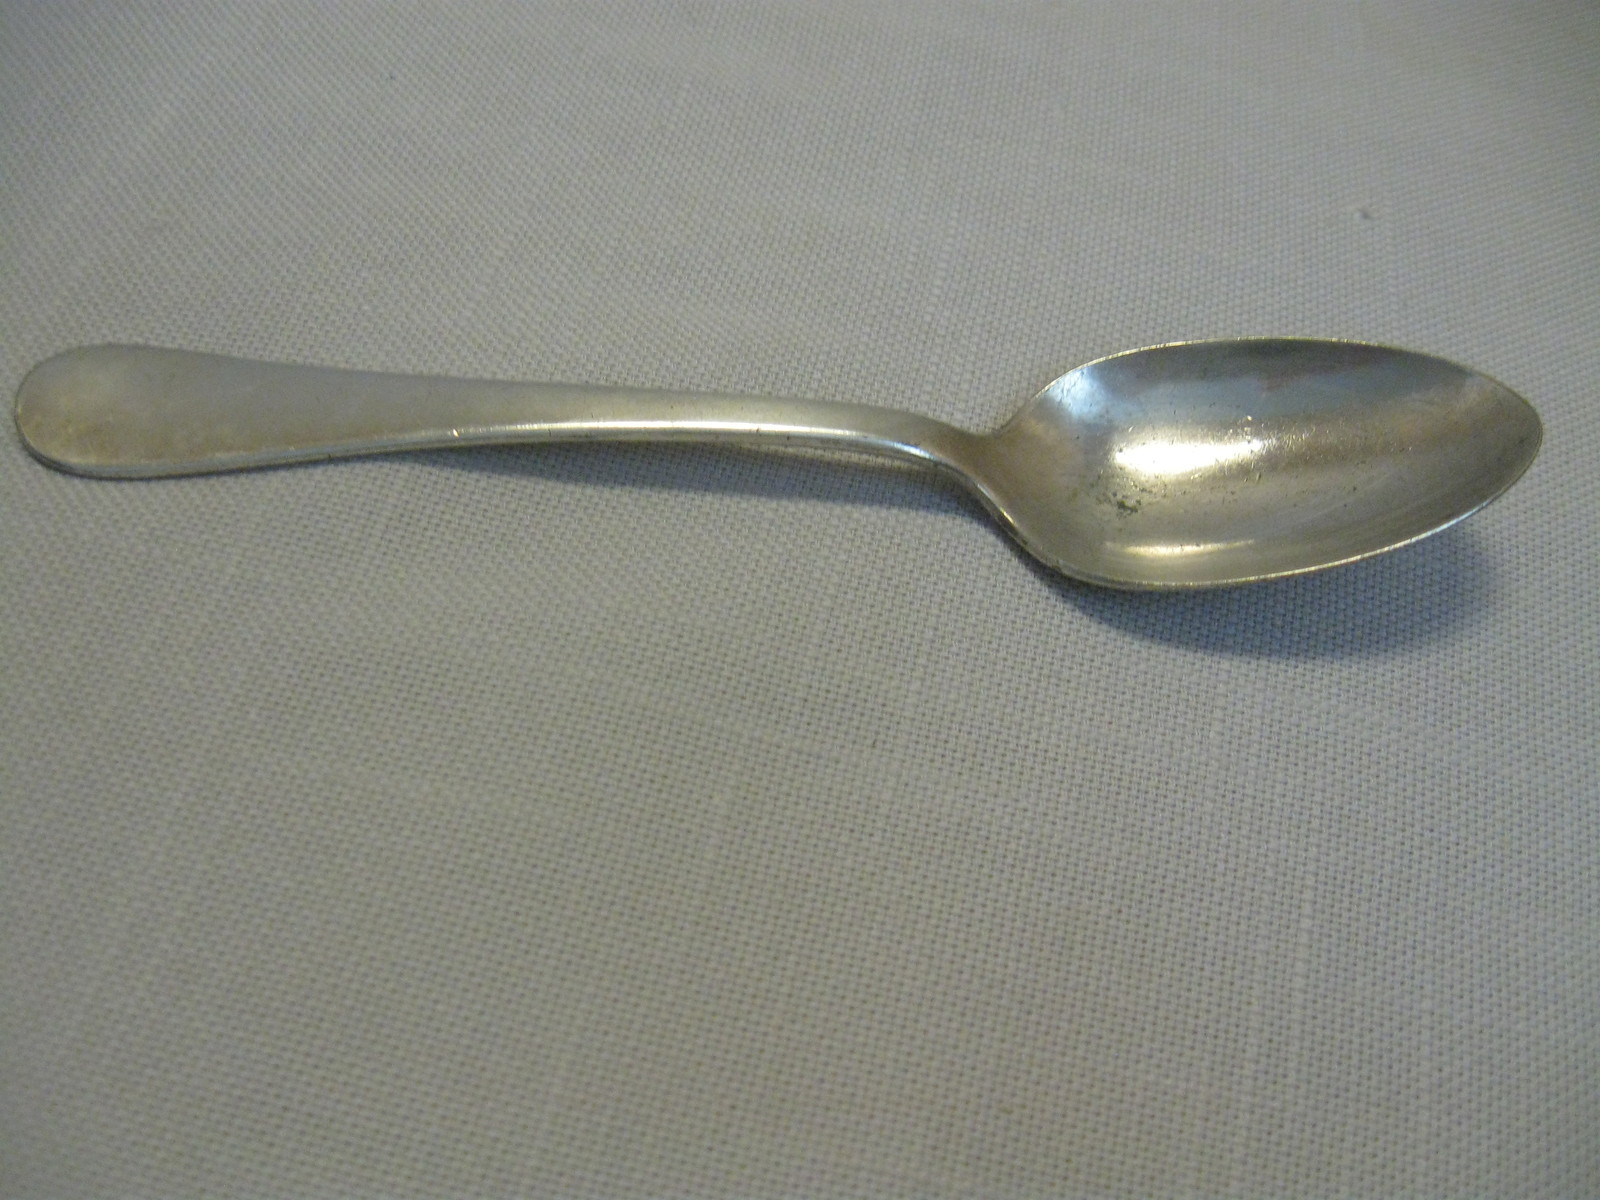 Primary image for R Wallace & Sons Mfg Co Silver Plate Teaspoon 6" 1871-1954